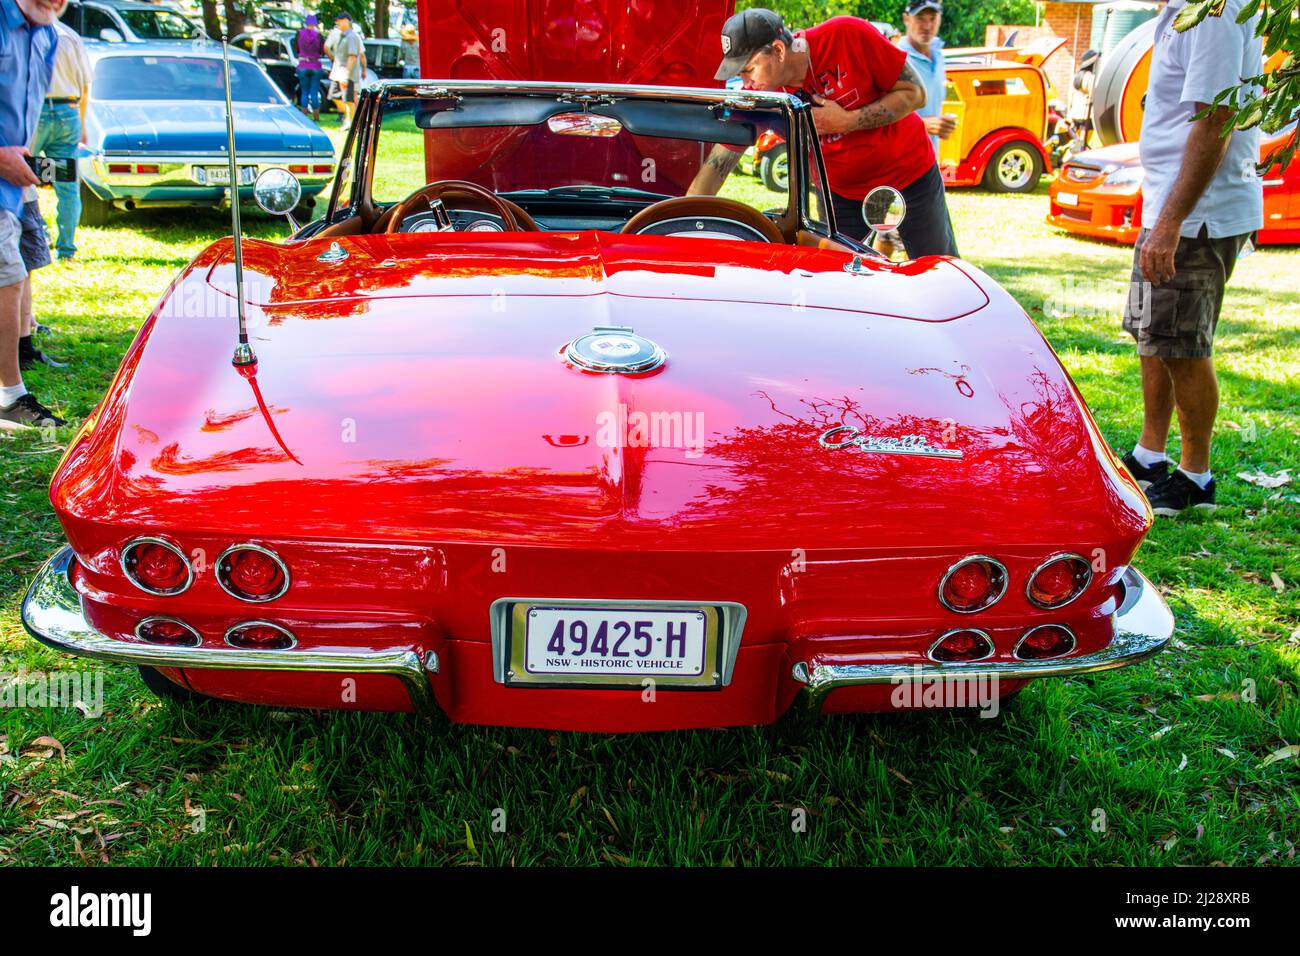 Rear of Red c1964-67 Corvette Sting Ray convertible on display at Tamworth Australia. Stock Photo